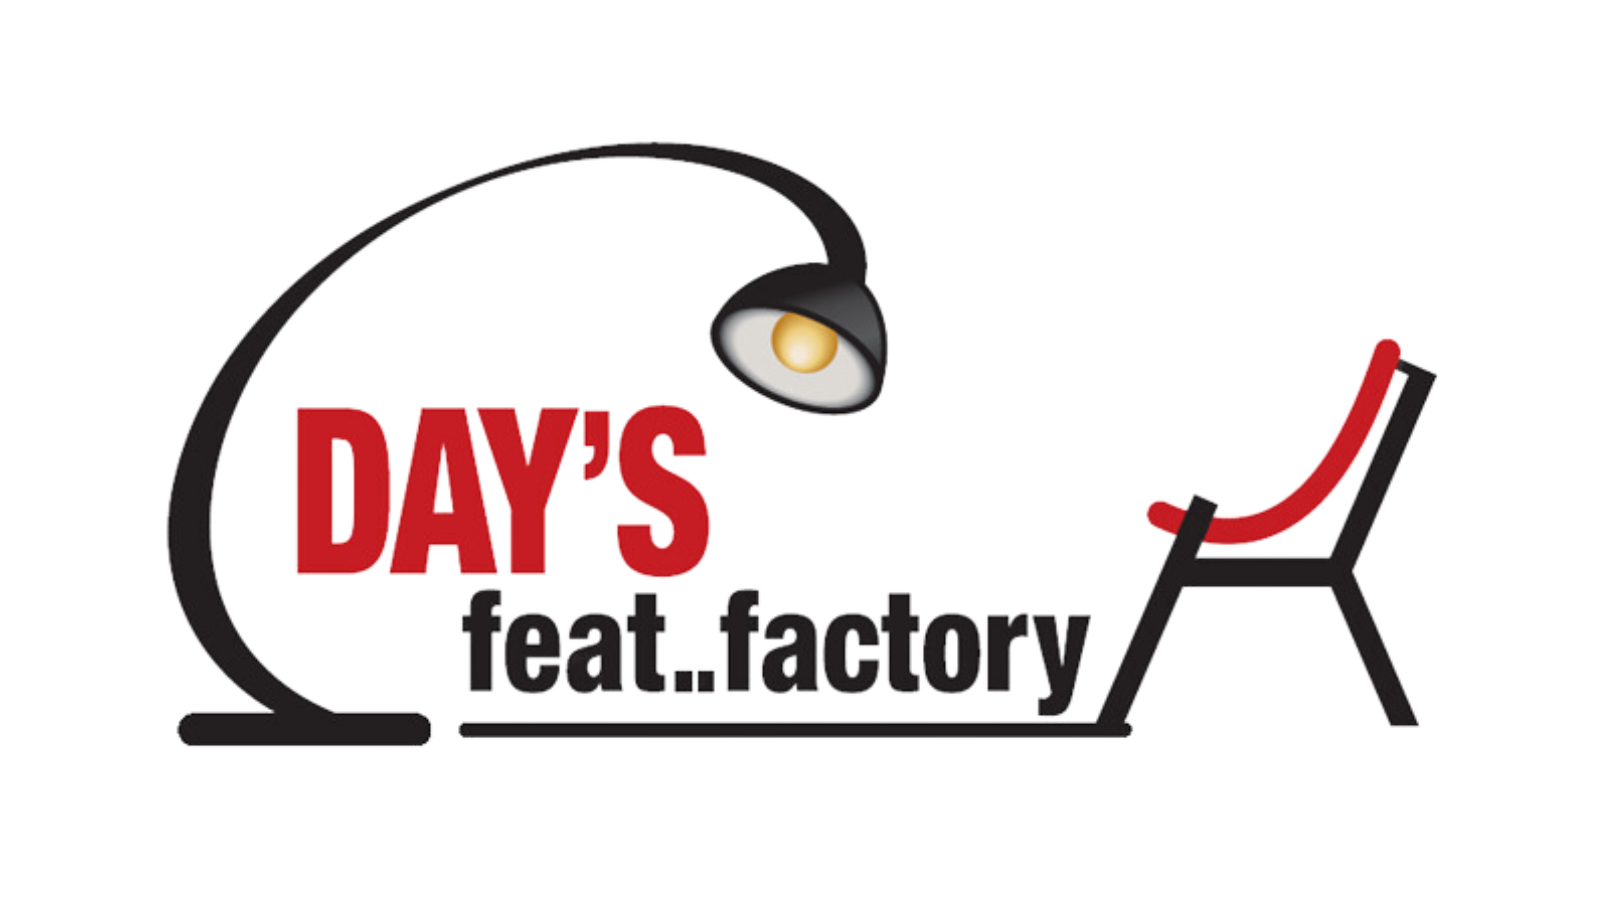 DAYS feat.factory